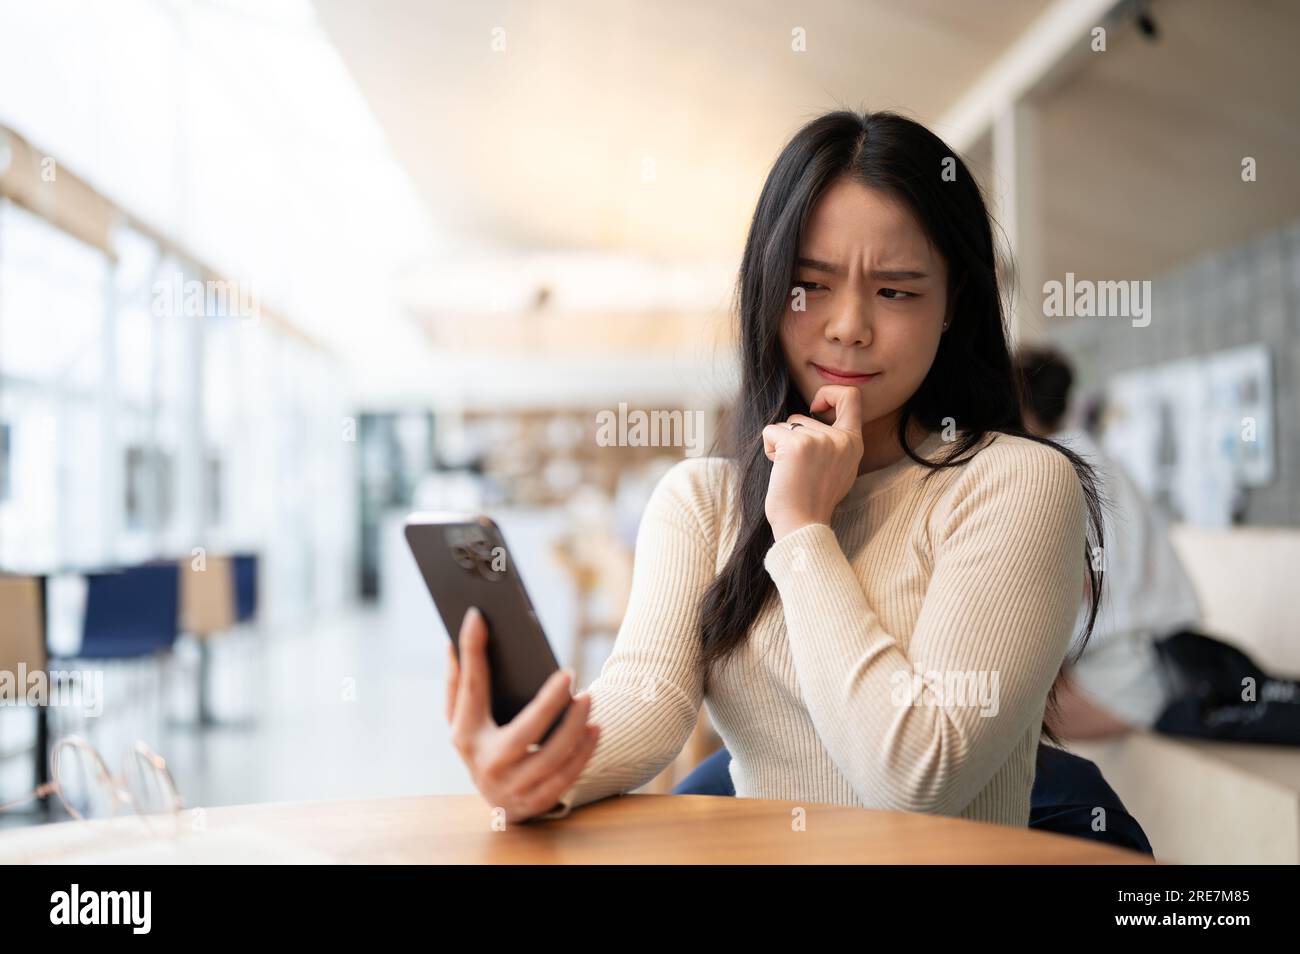 An unsure and thoughtful young Asian woman is looking at her smartphone screen with a serious and doubtful face while sitting in a coffee shop. worrie Stock Photo